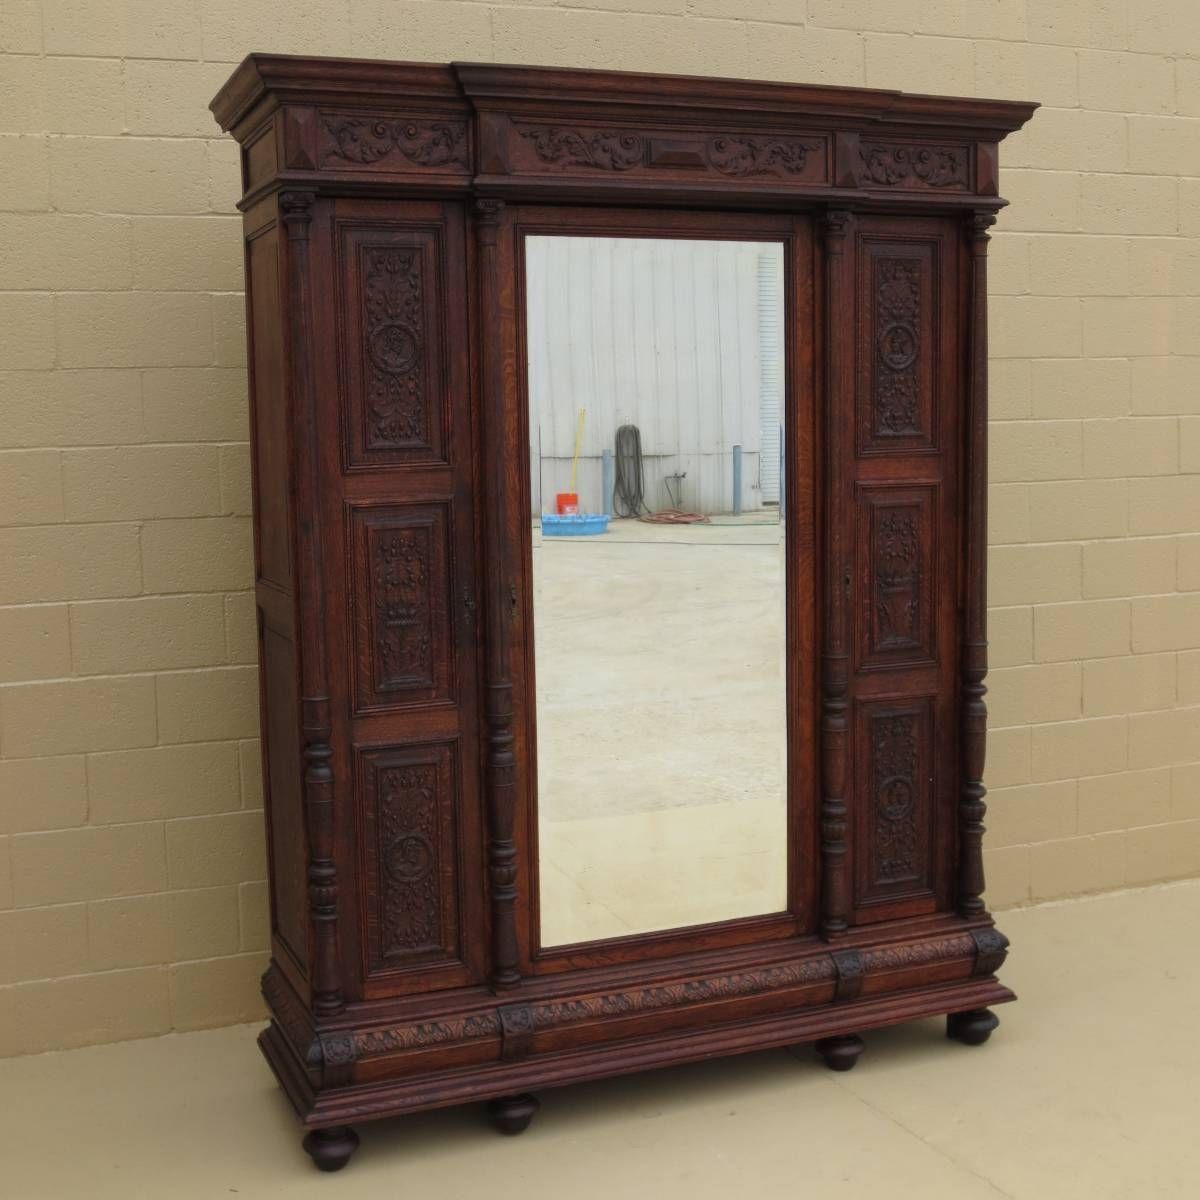 Antique Armoires, Antique Wardrobes, And Antique Furniture From For Antique Wardrobes (View 3 of 15)